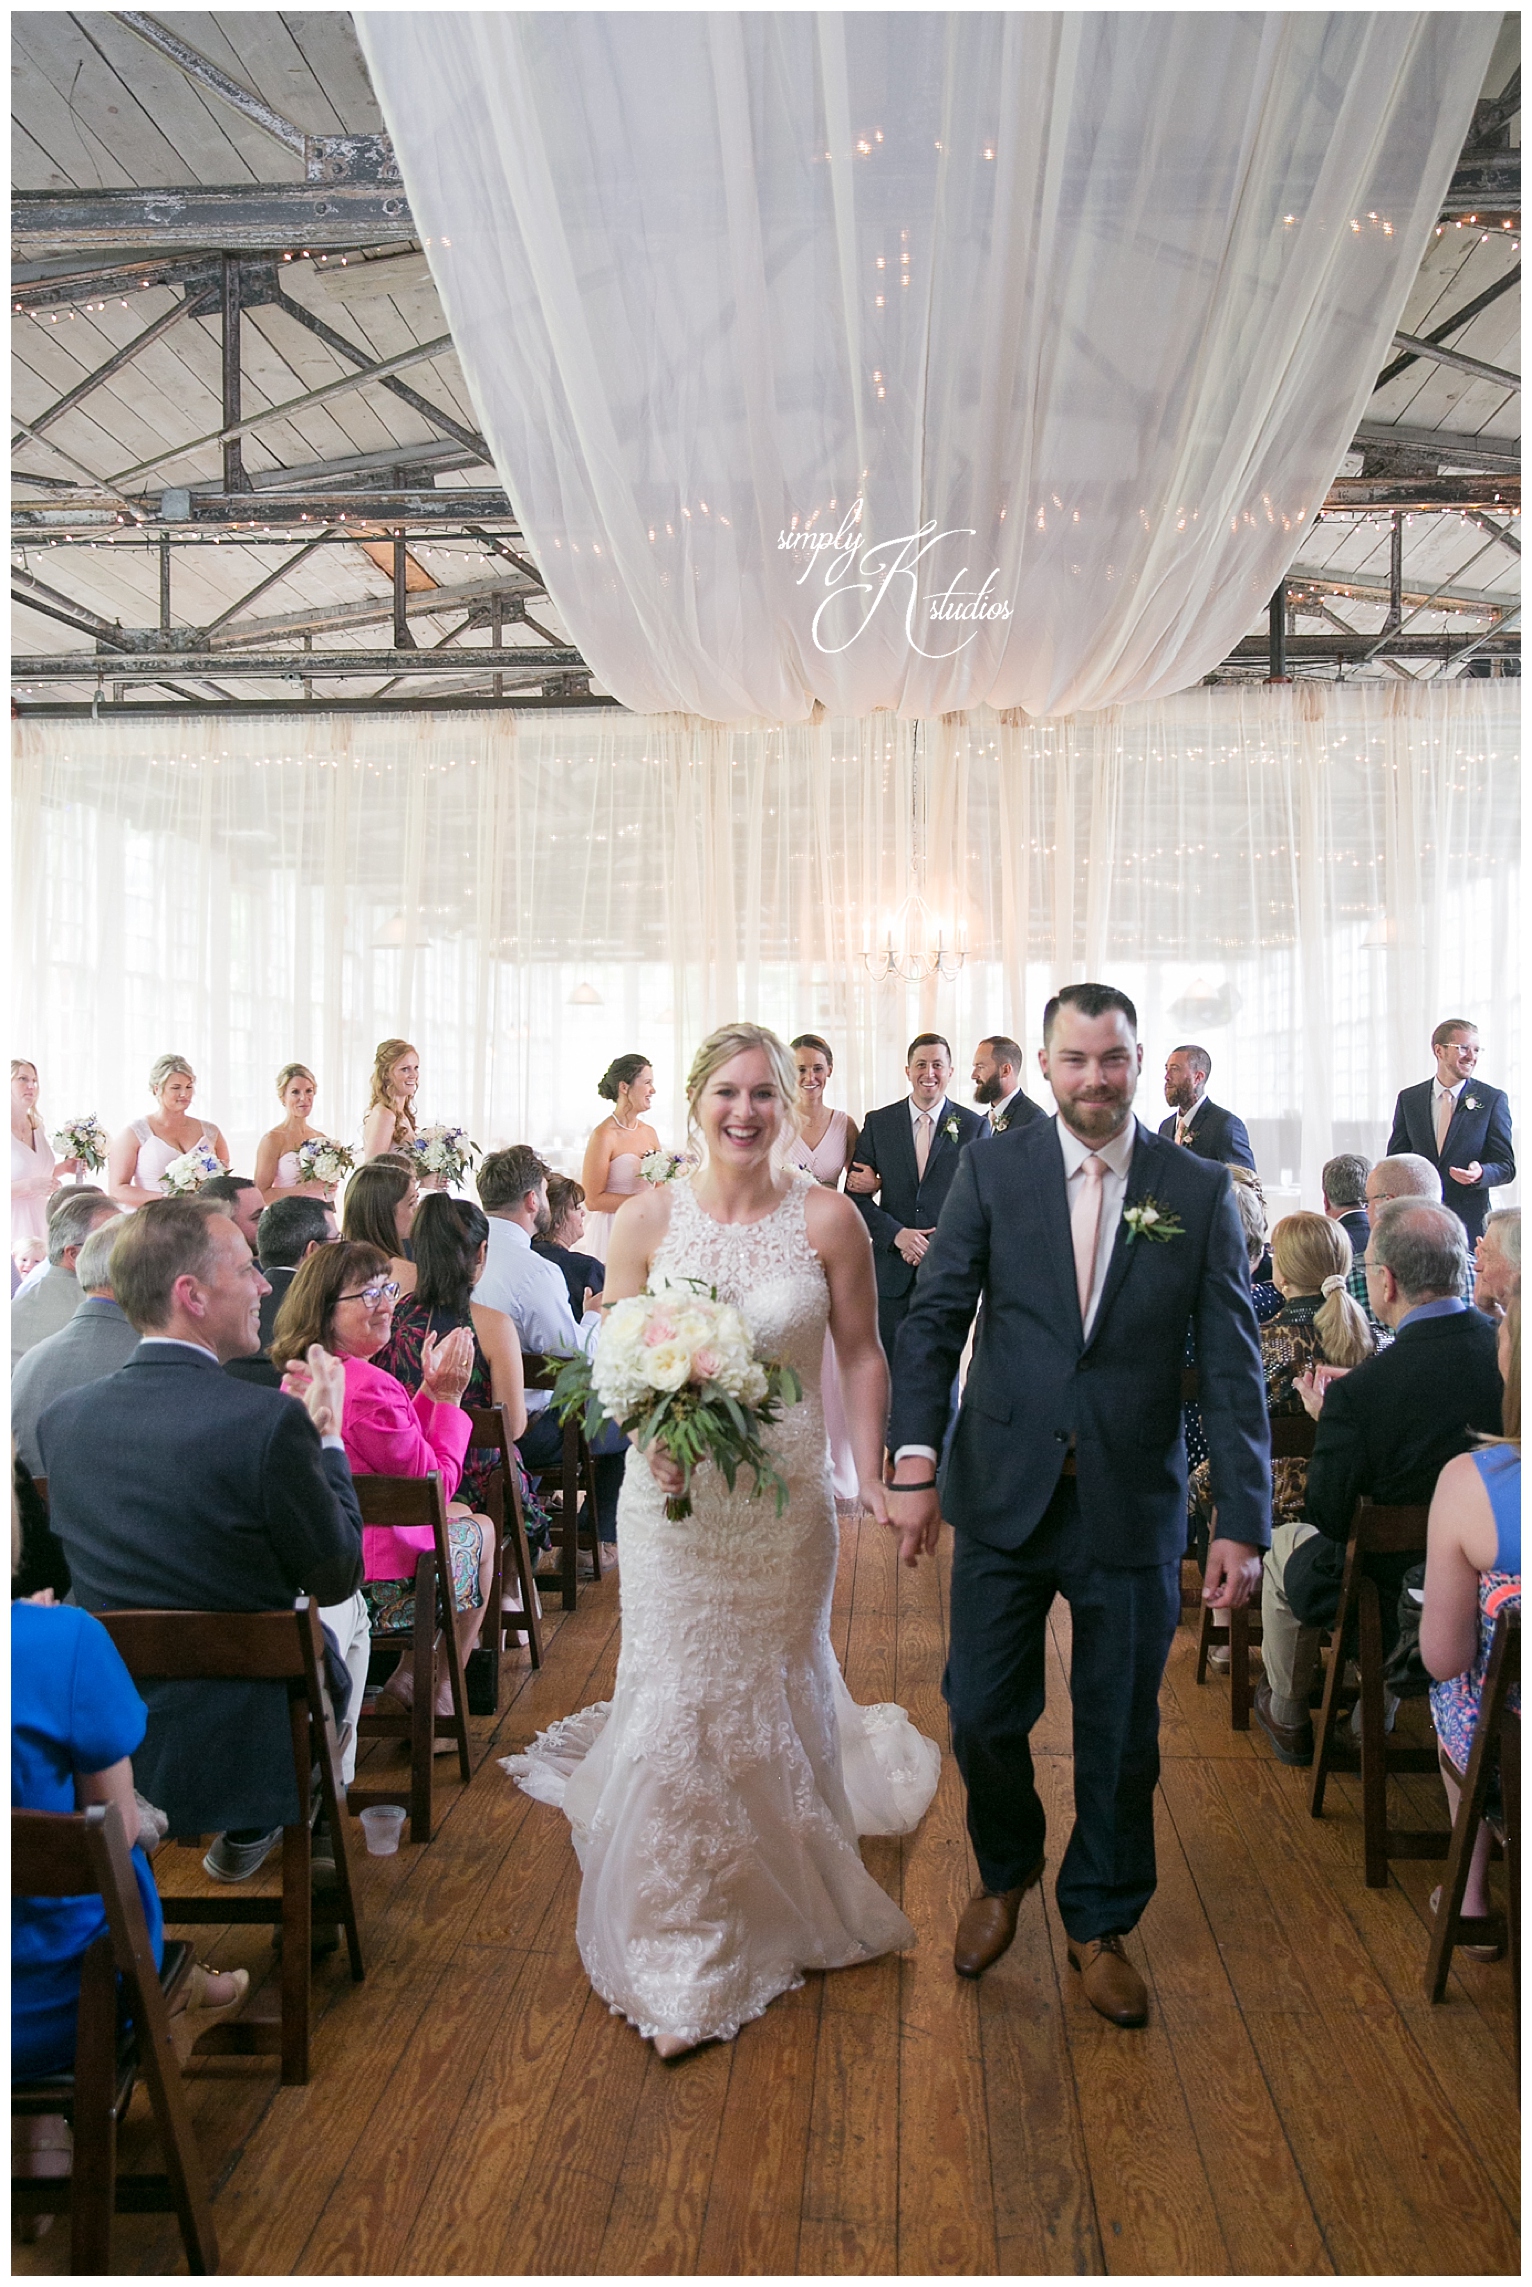 Weddings at The Lace Factory.jpg